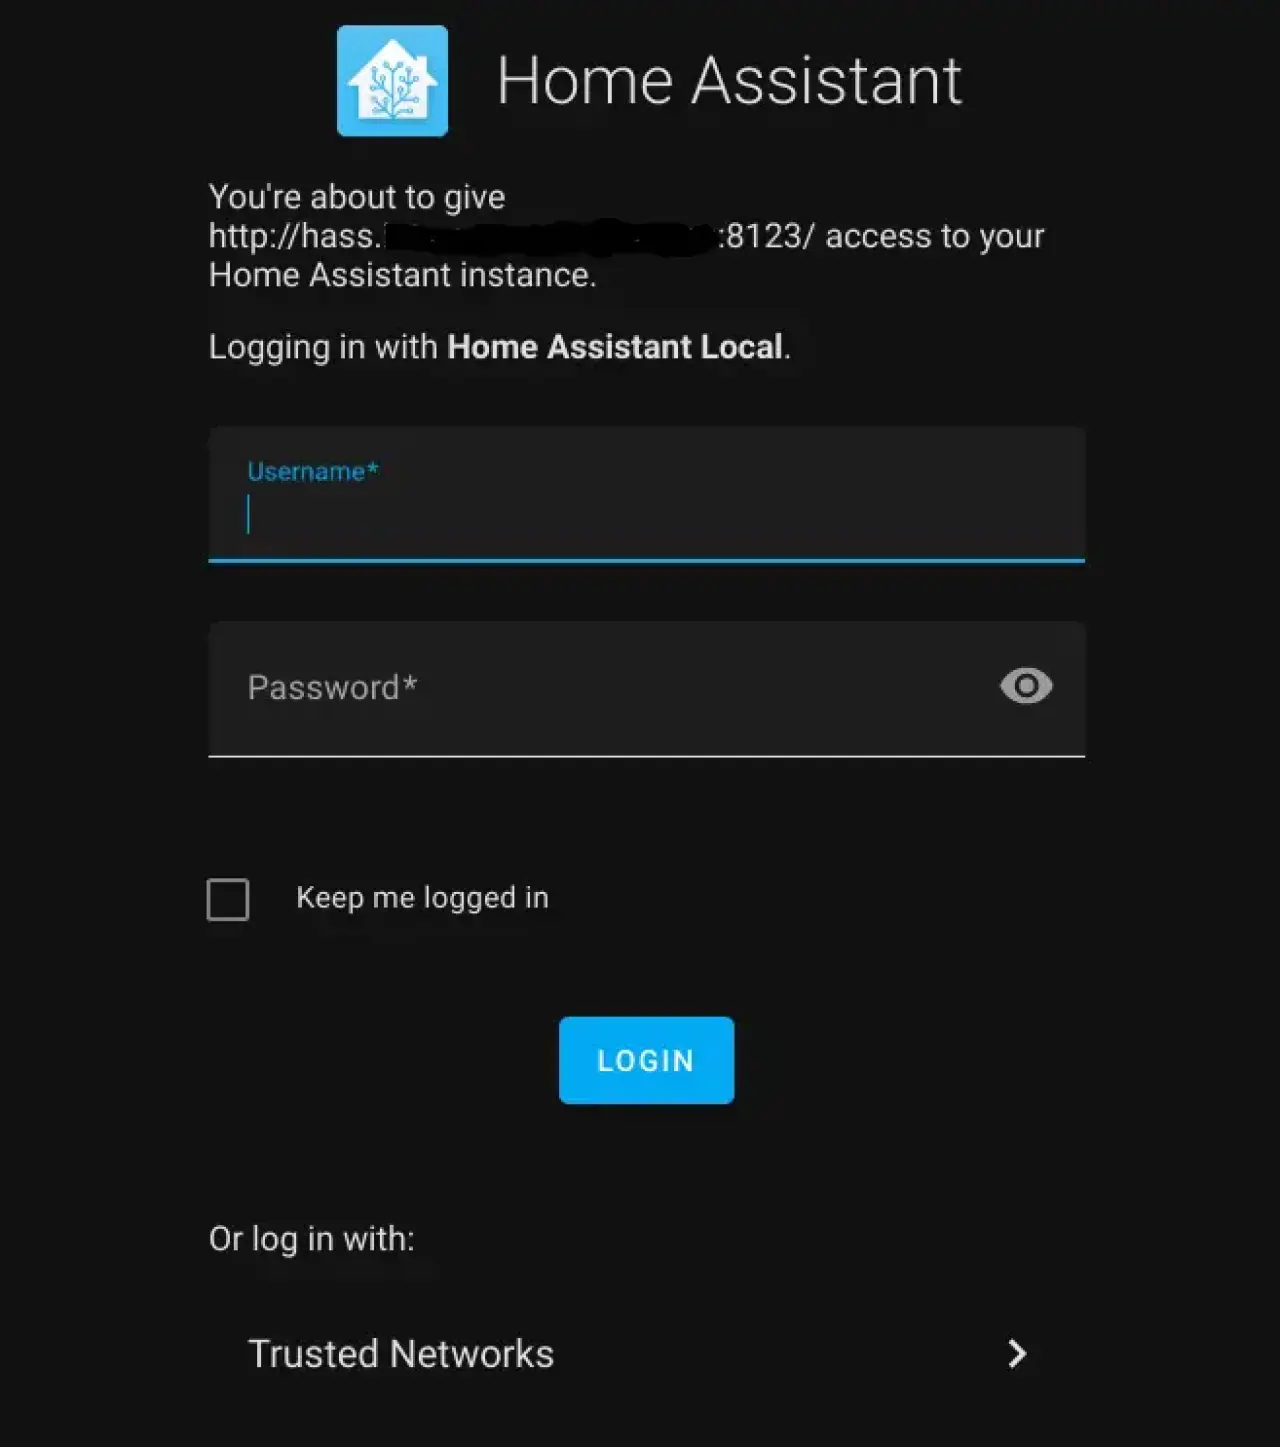 Home Assistant Login Page.